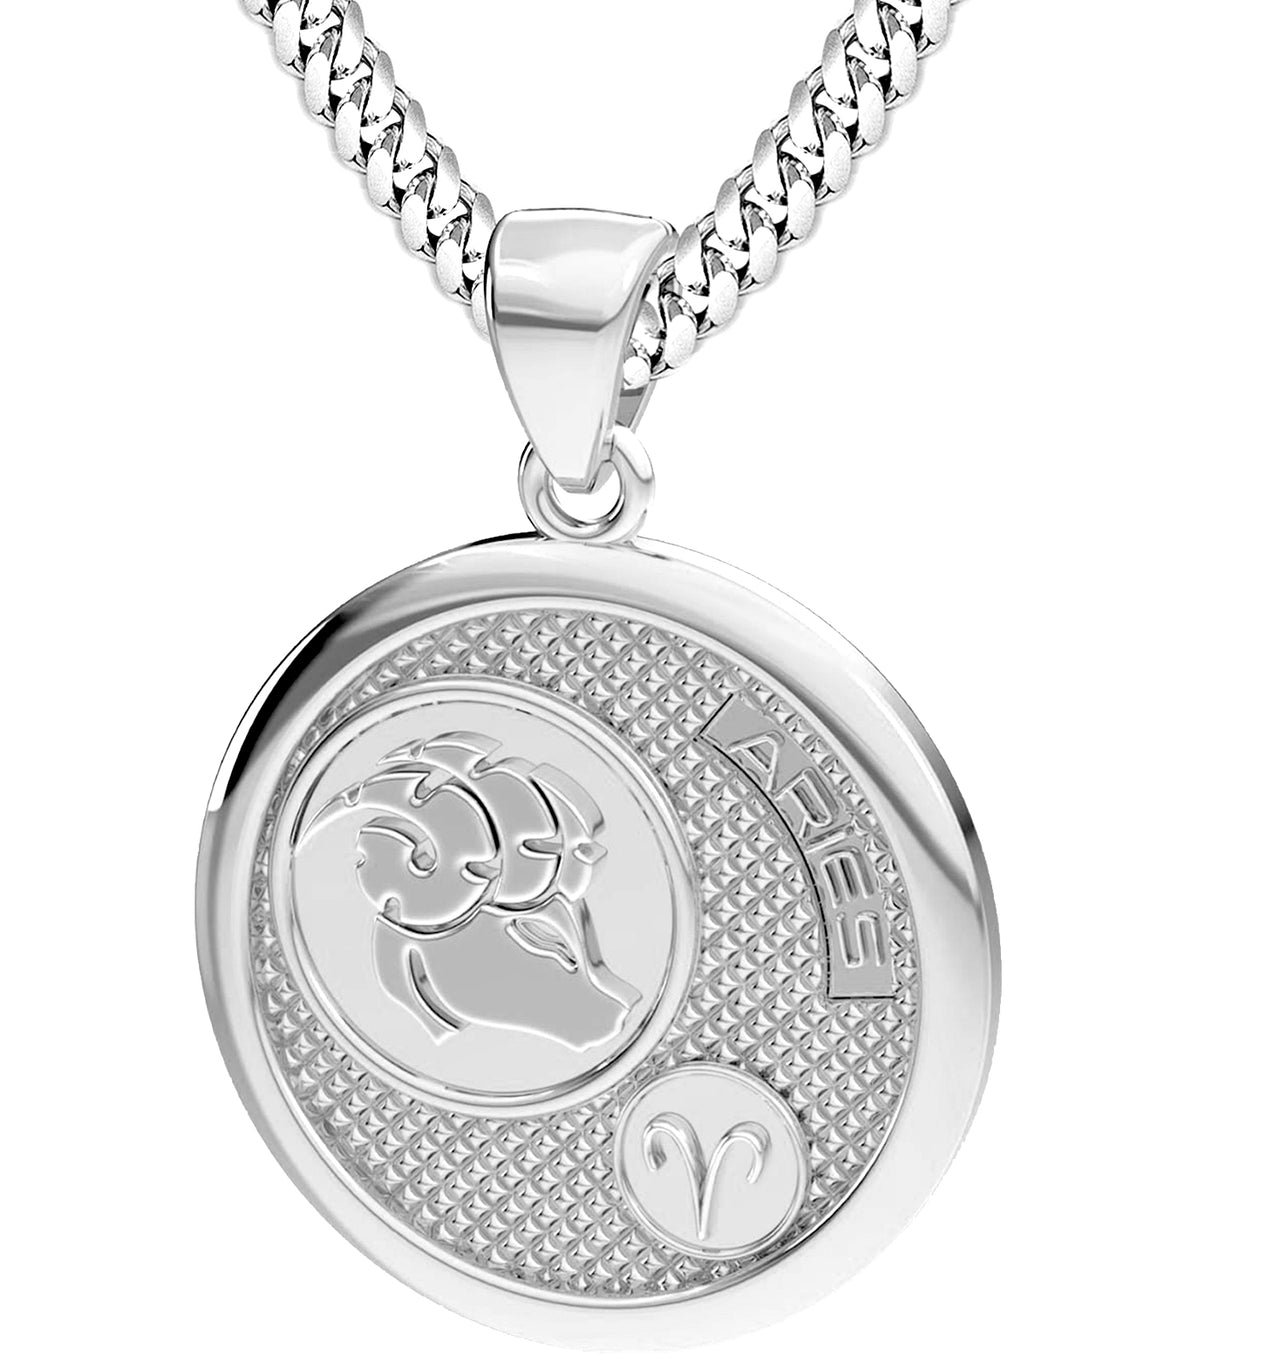 Men's 925 Sterling Silver Round Aries Zodiac Polished Finish Pendant Necklace, 33mm